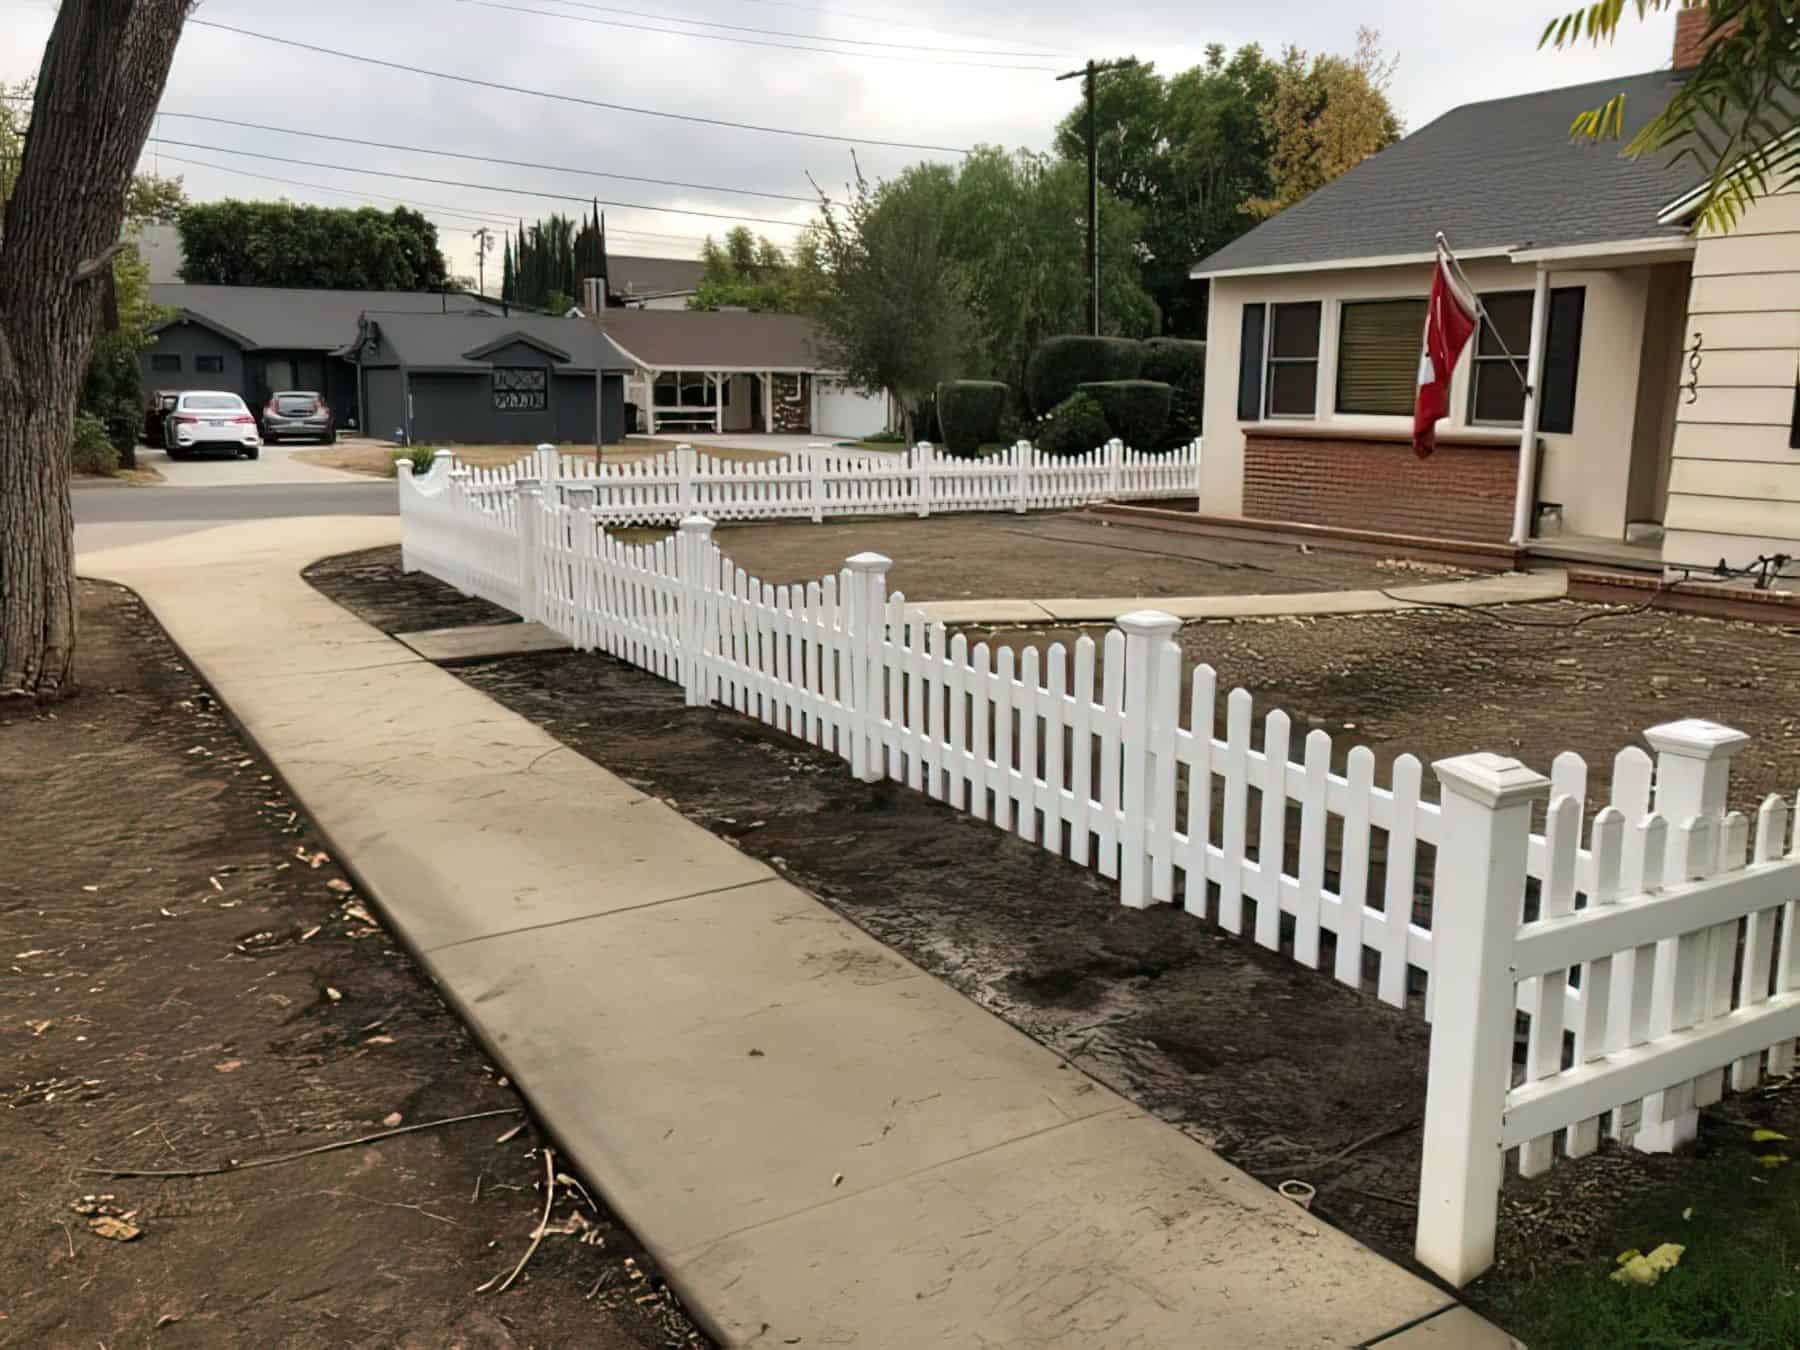 Knee high vinyl scalloped picket fence separating the sidewalk from the quaint suburban home with hoisted flag and trees.